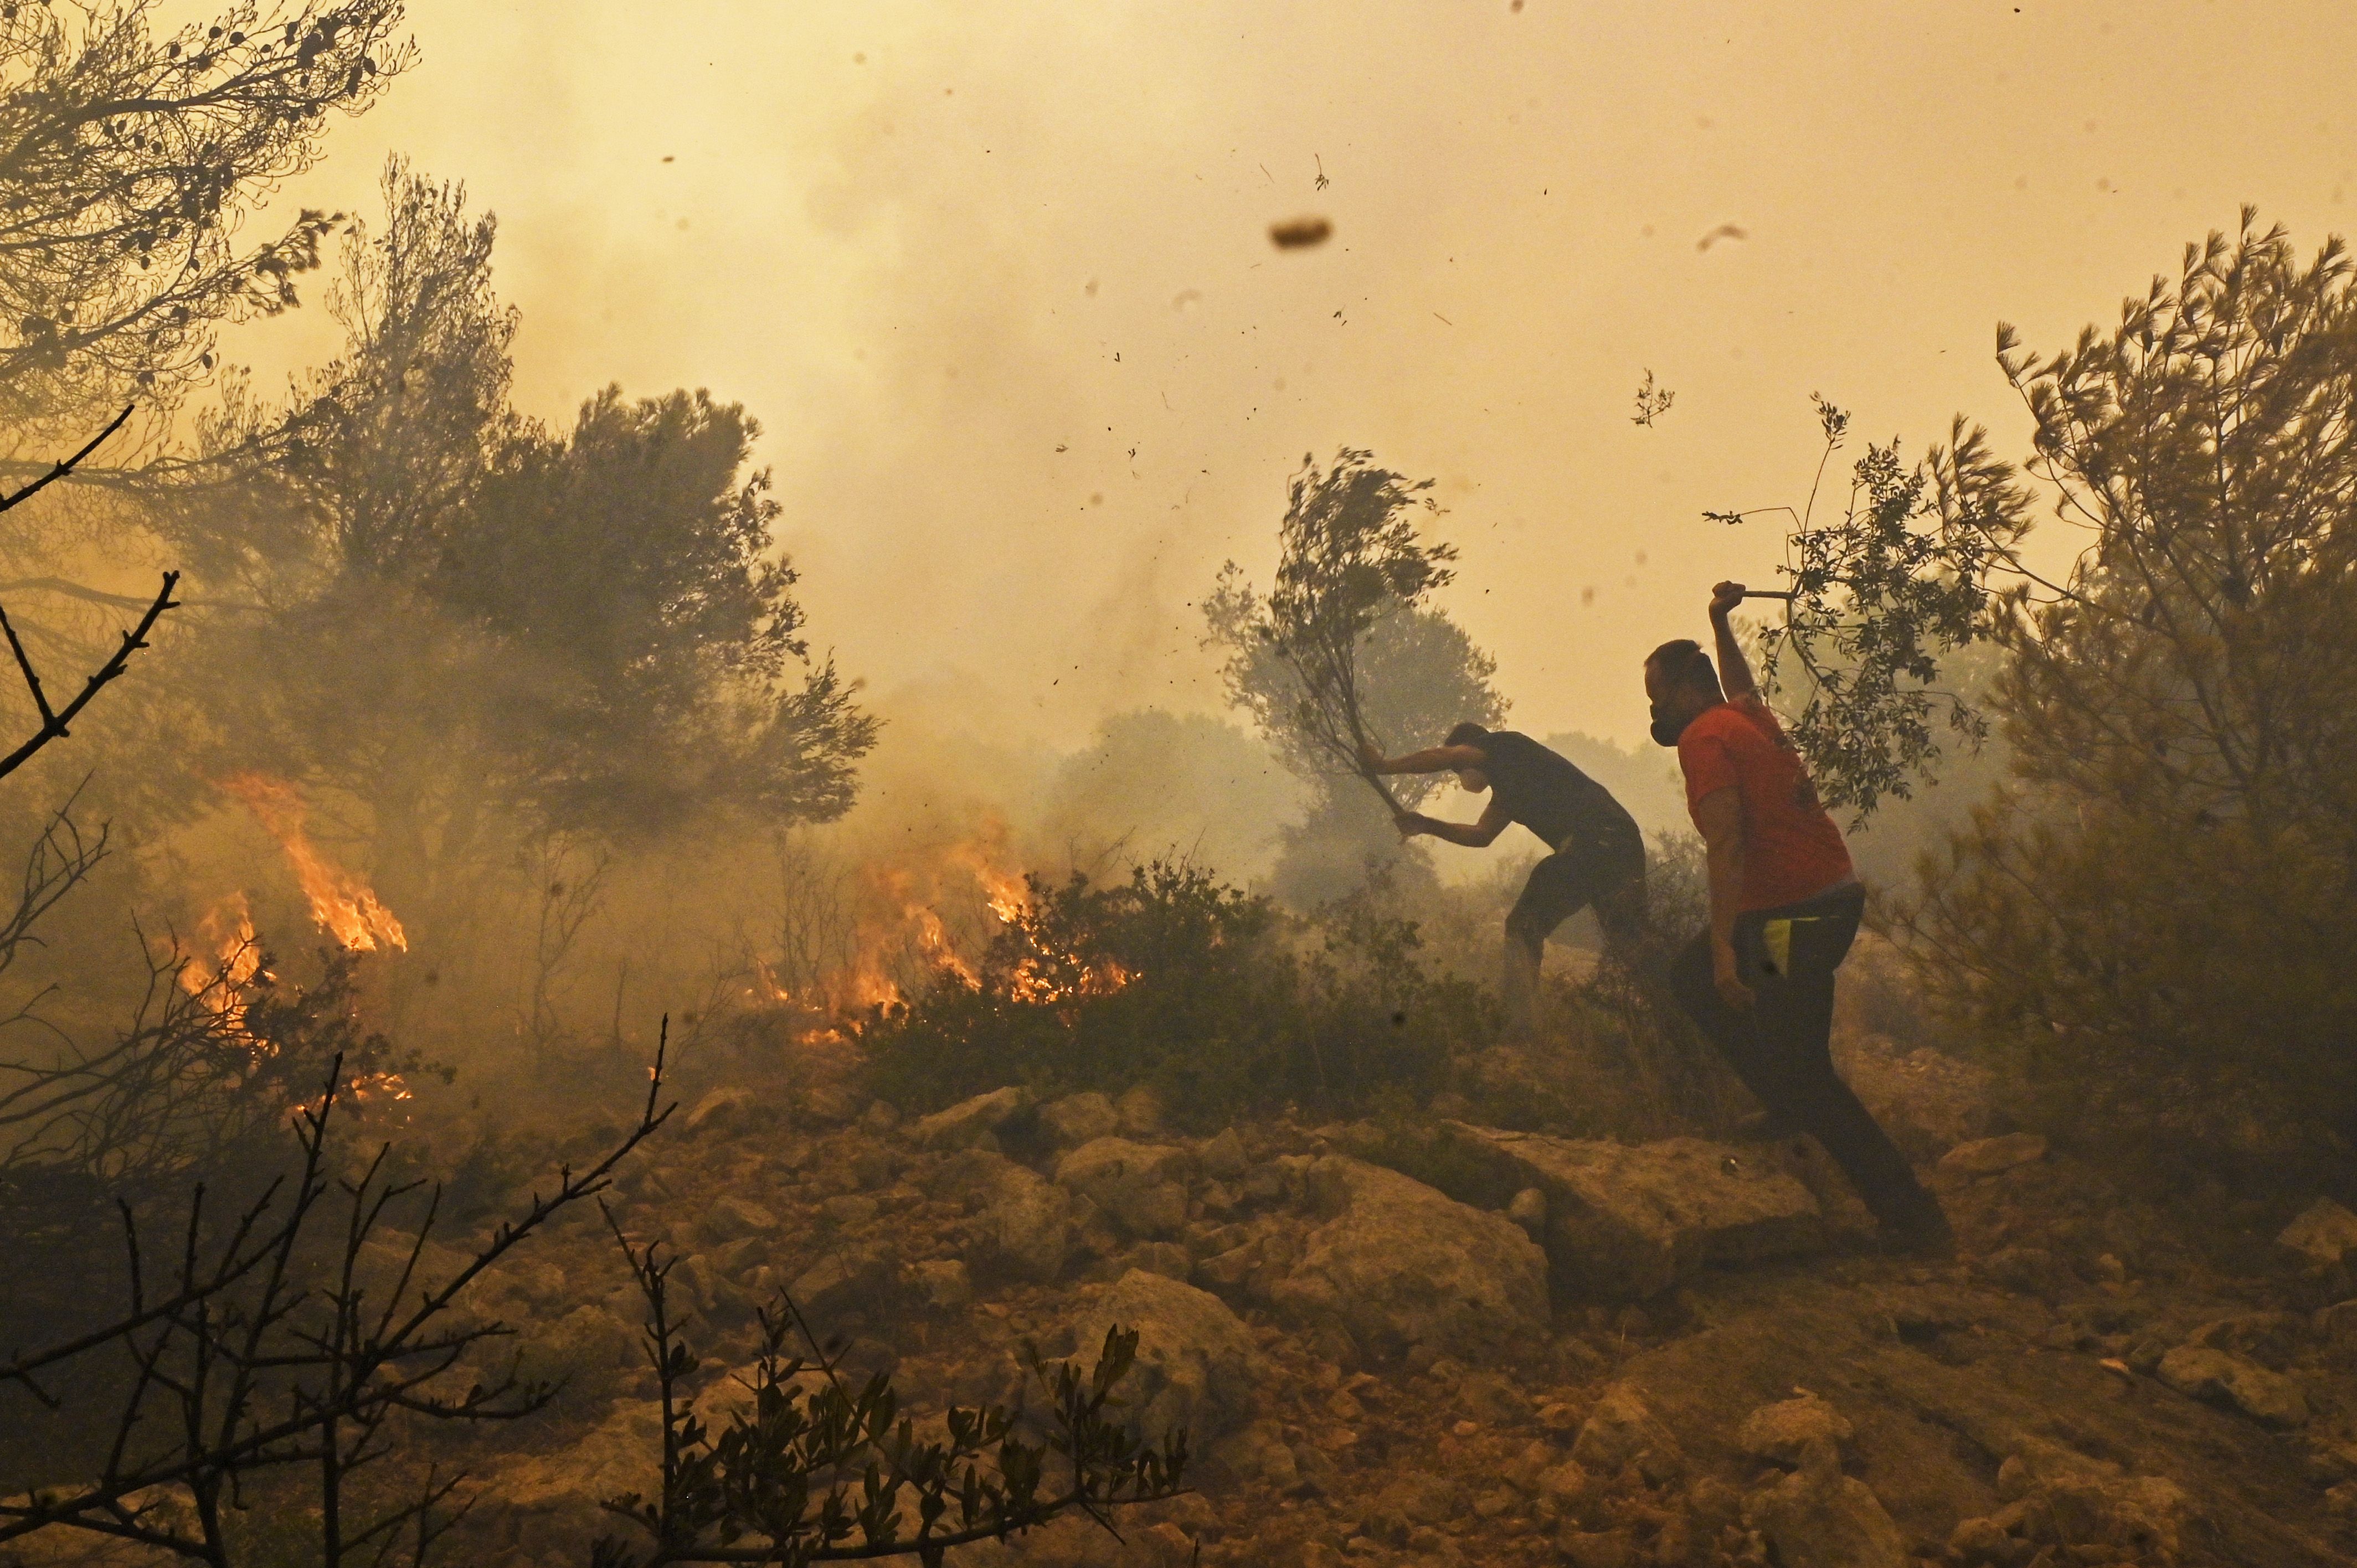 Locals help firefighters as they try to extinguish a wildfire burning near the village Vlyhada near Athens on July 19, 2023 in Athens, Greece. Several forest fires raged on the outskirts of the Greek capital amid a relentless heatwave, with the most violent fire in the forest of Dervenohoria 50 km north of Athens where 140 firefighters, six water bombers and a helicopter battled the flames during high winds. France and Italy have sent planes to support the operation. The Acropolis of Athens and other archaeological sites in Greece announced reduced opening hours due to the heatwave conditions. 